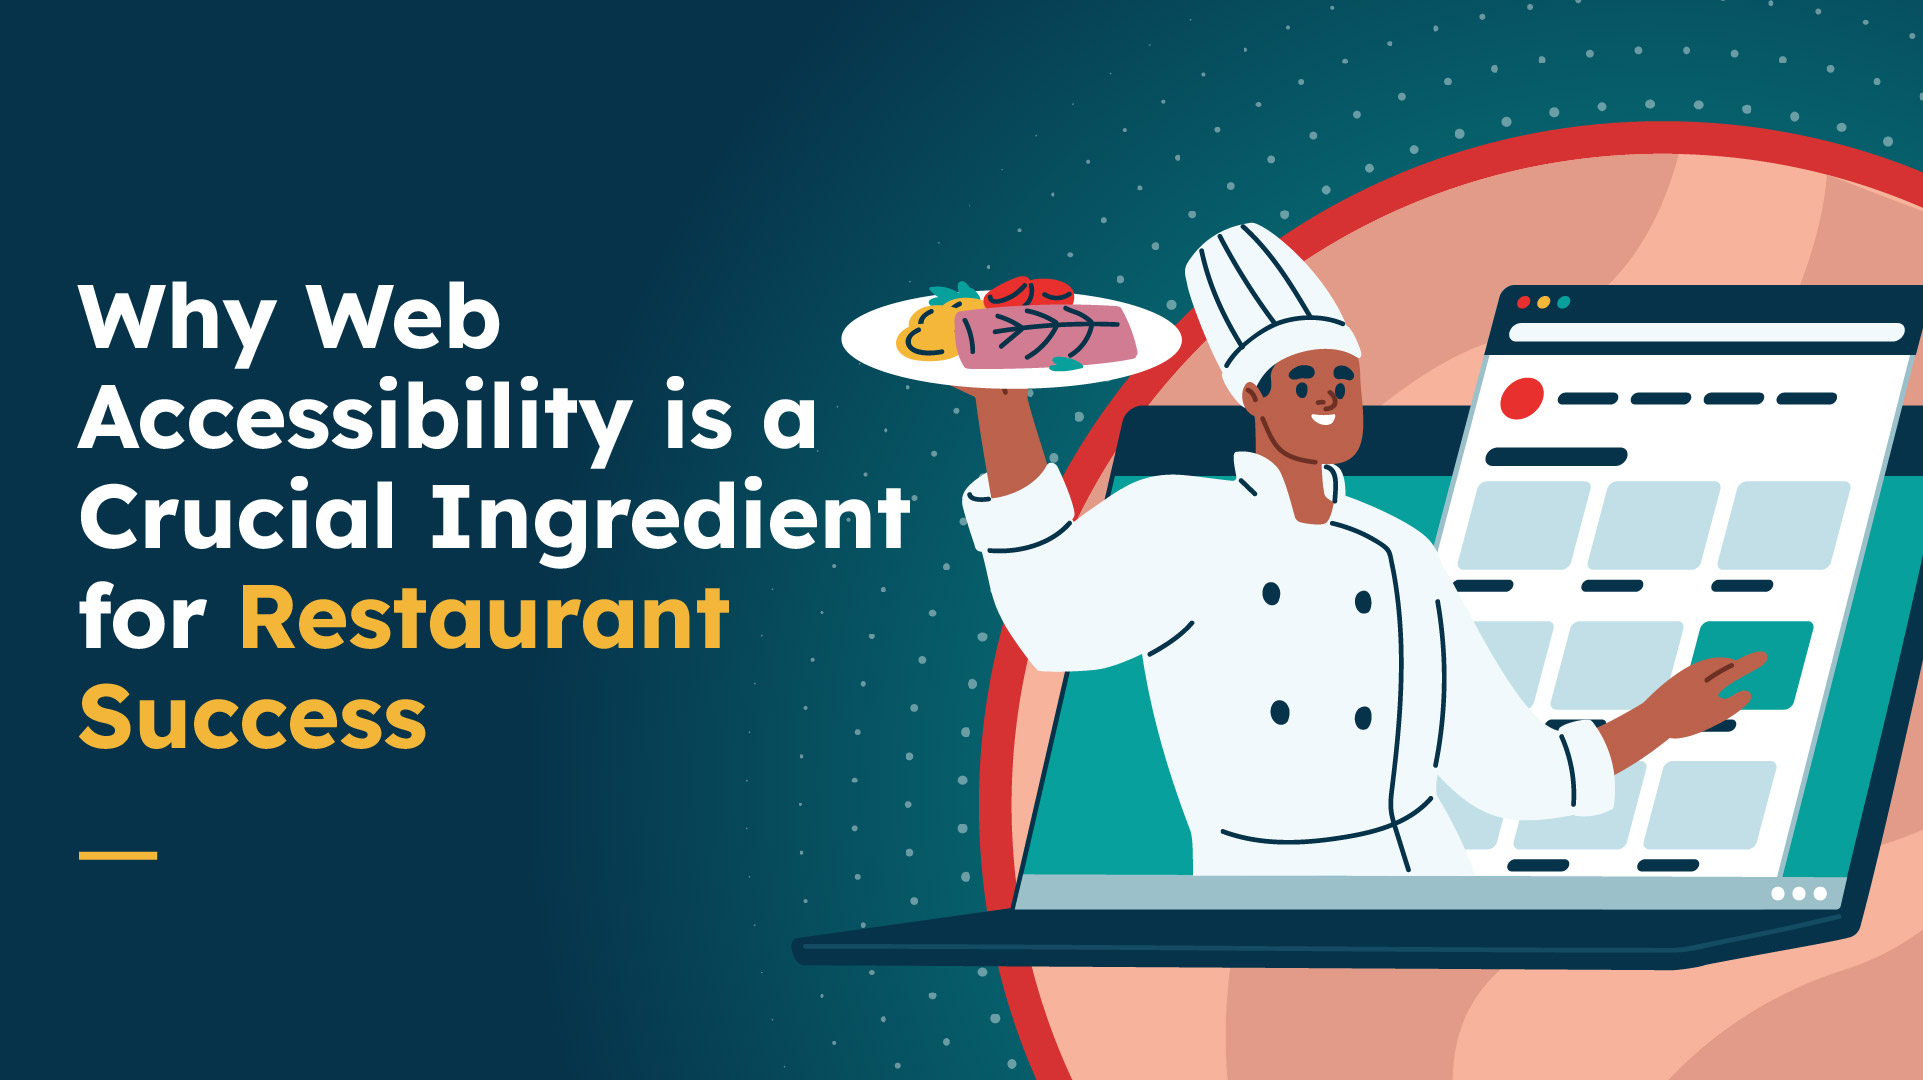 Why Web Accessibility is a Crucial Ingredient for Restaurant Success